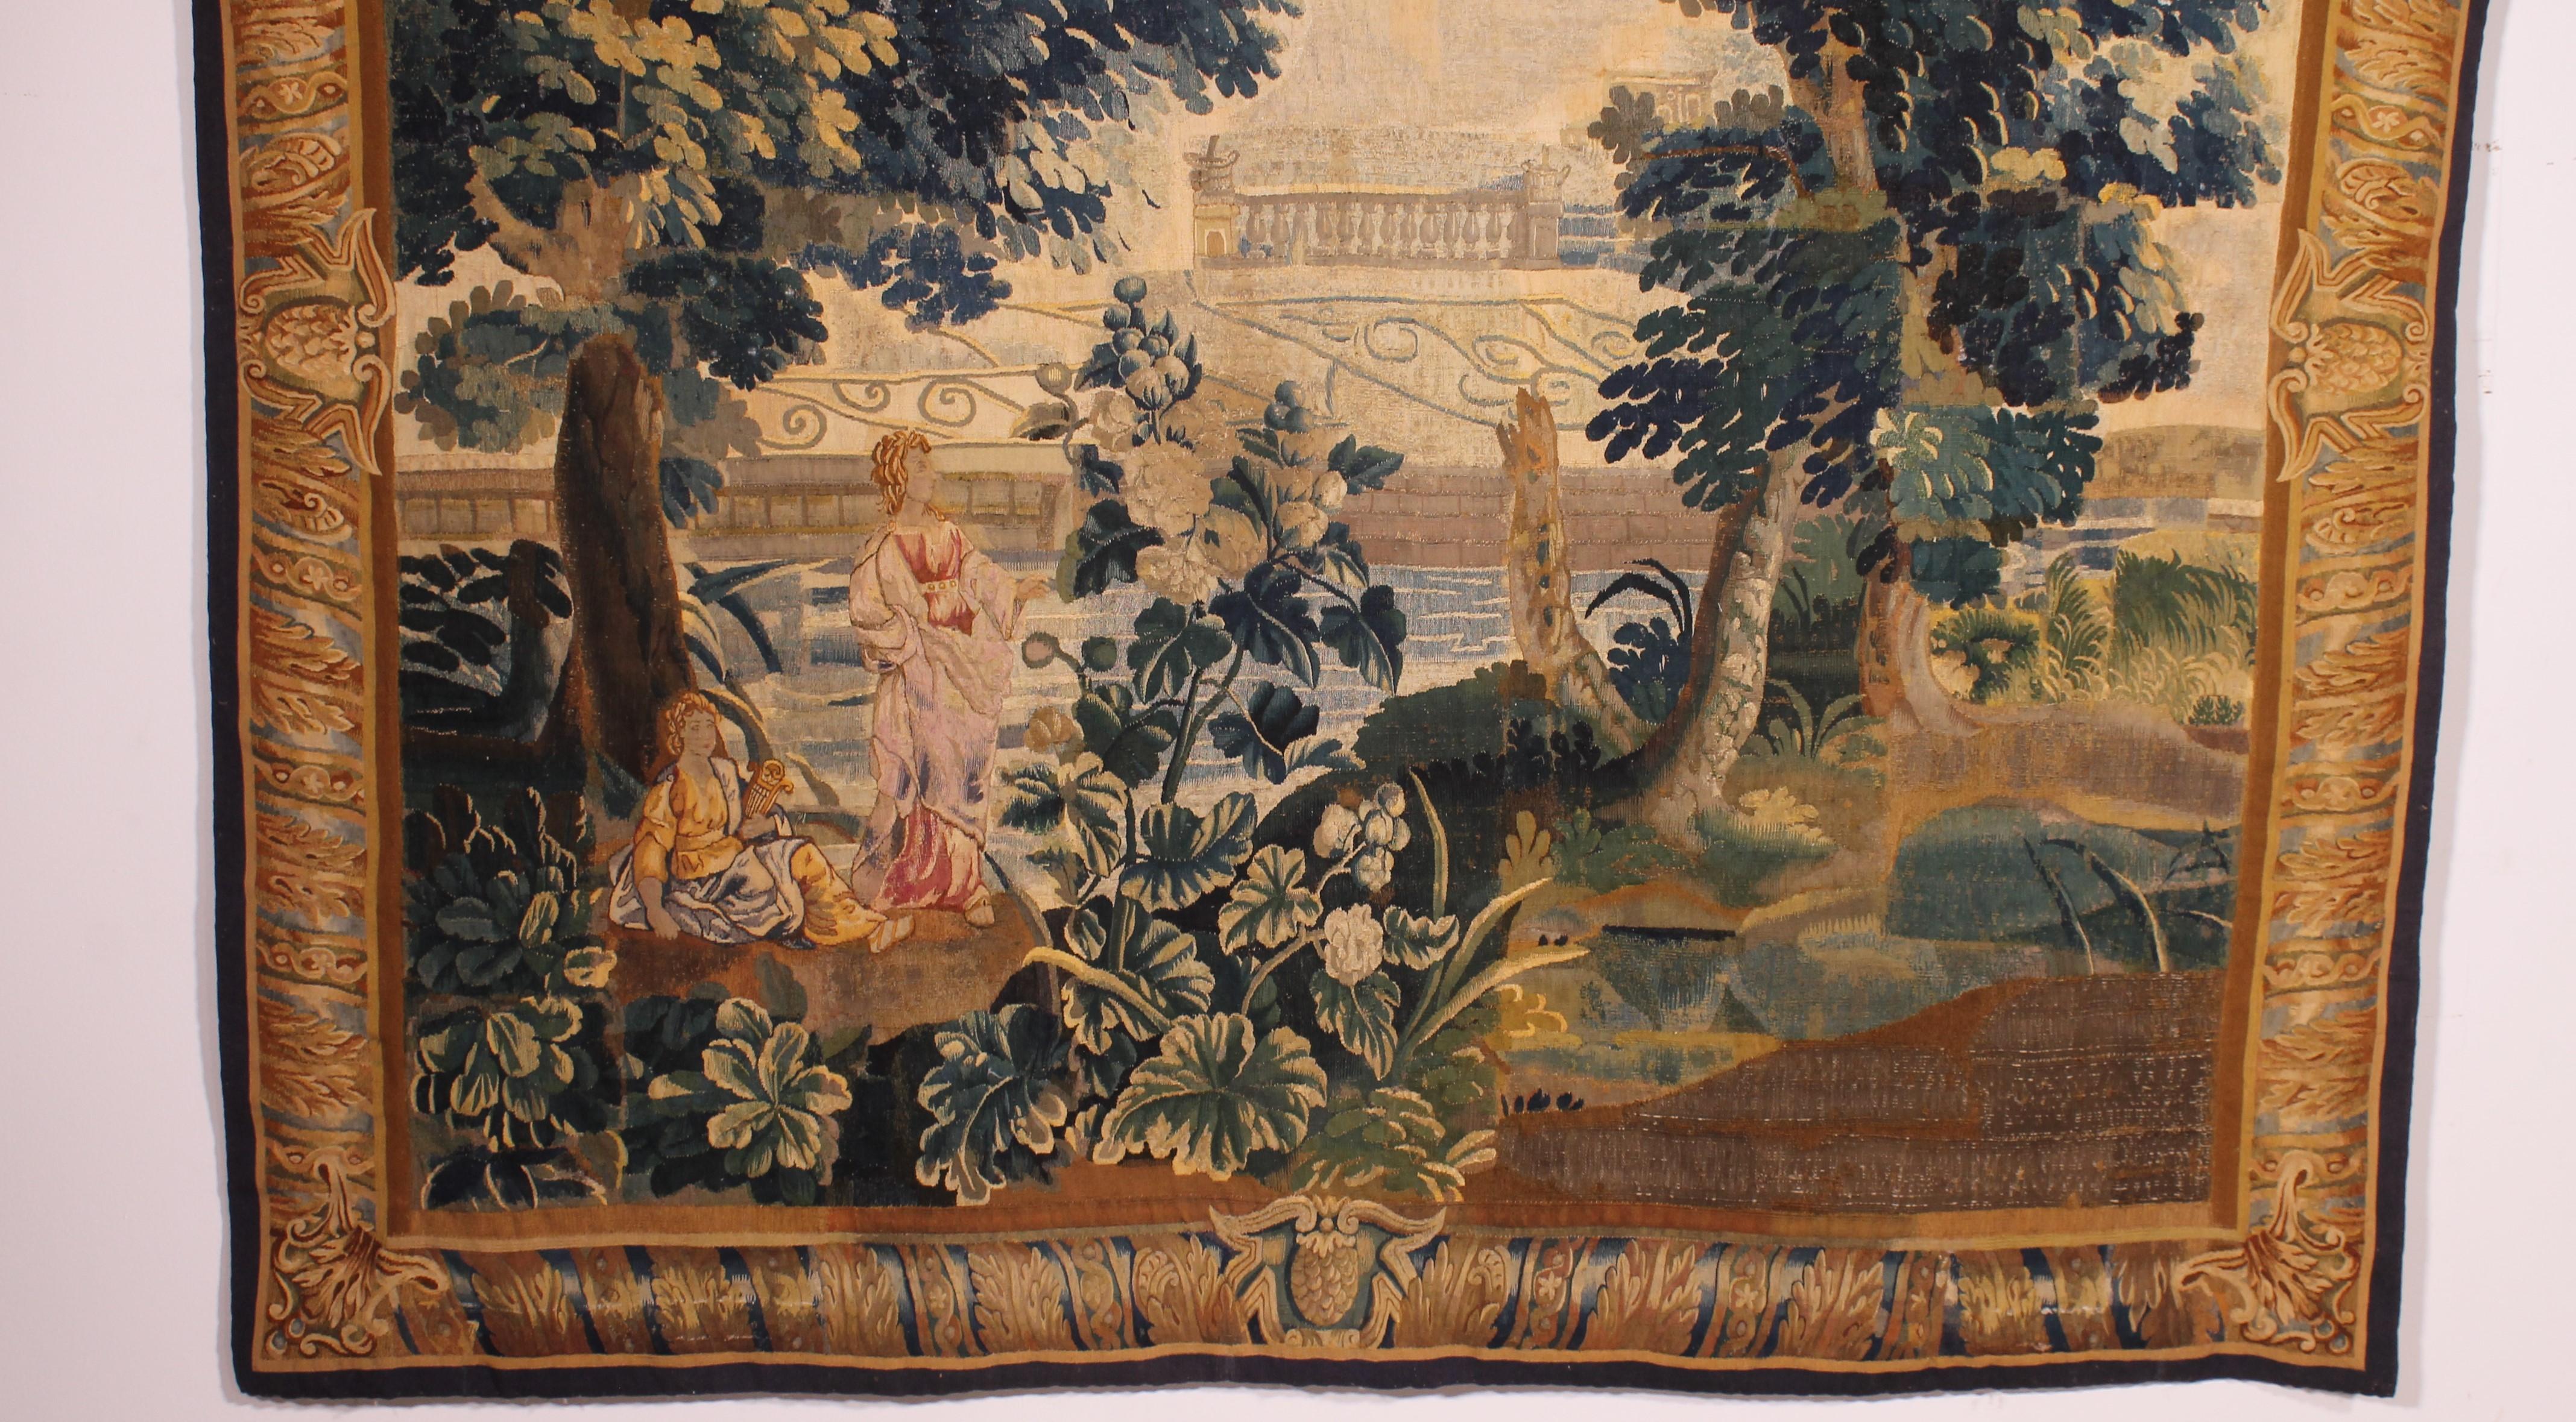 Lovely Brussels tapestry in wool and silk from the 18th century

Very beautiful quarter-stitch tapestry representing a pond on which a young musician sits with a lyre under his arm. Next to him is a woman in an pink dress and a white coat. We can